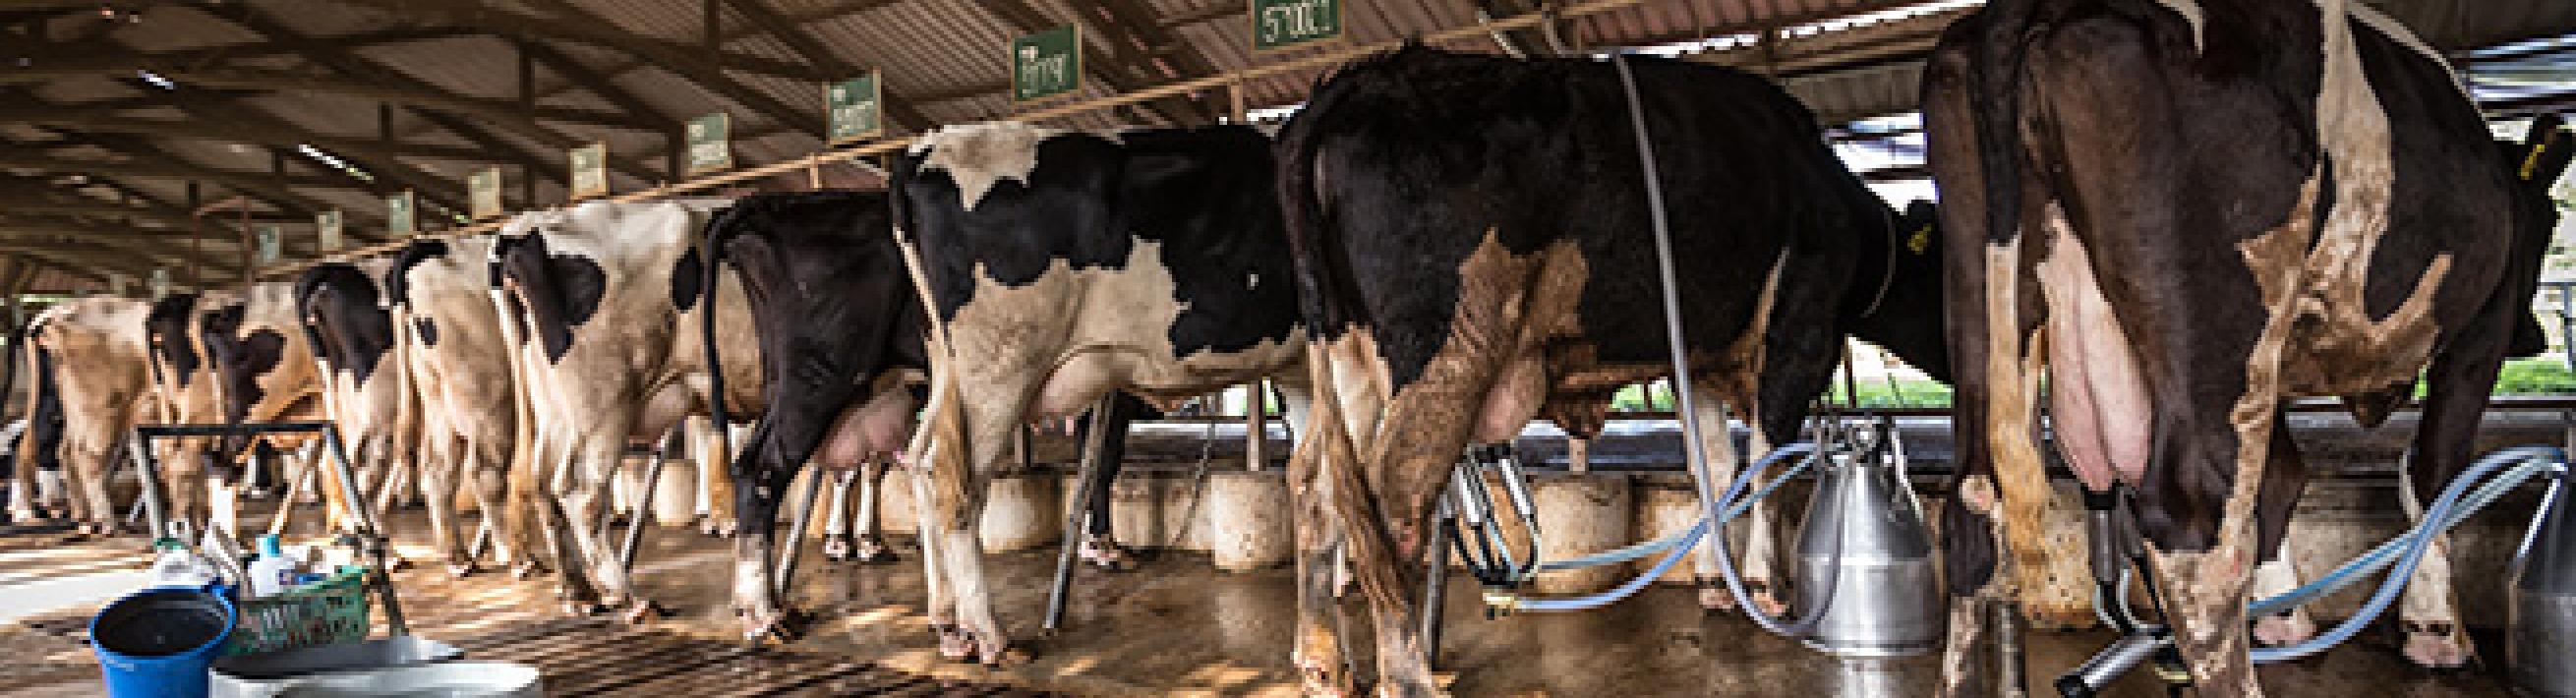 A row of cows being milked by machines